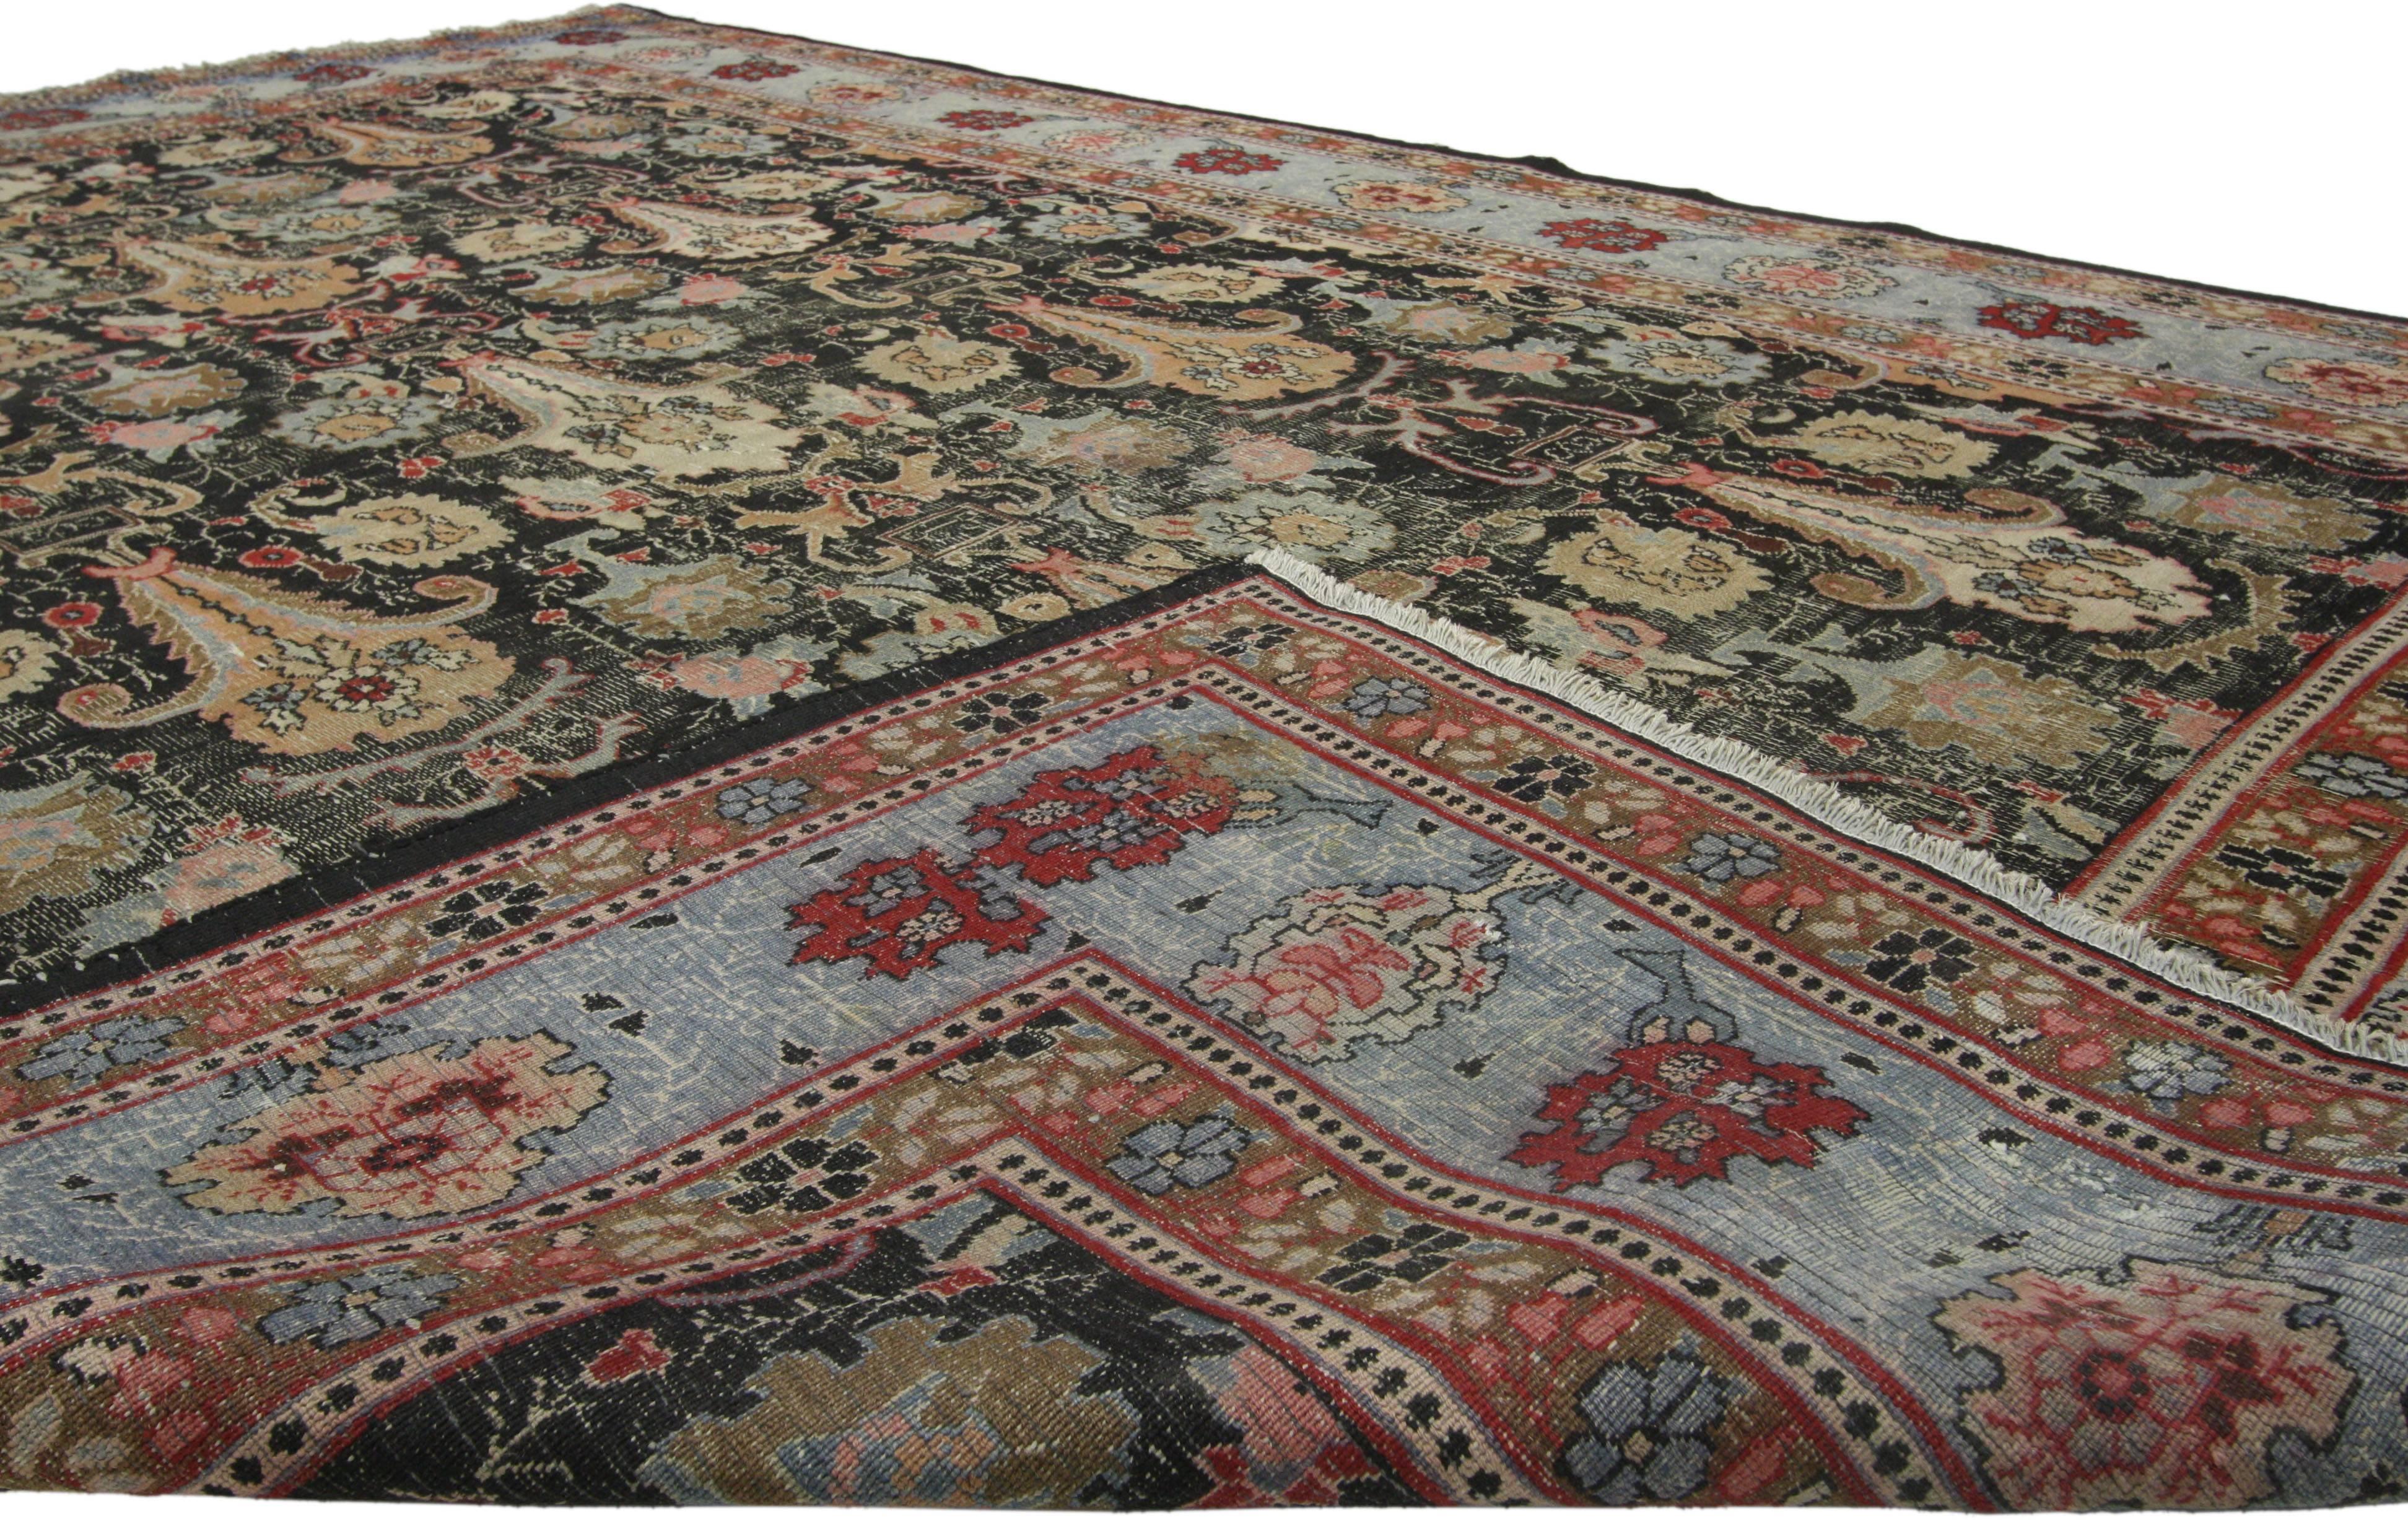 Wool Distressed Antique Persian Khorassan Rug with Rustic American Colonial Style For Sale